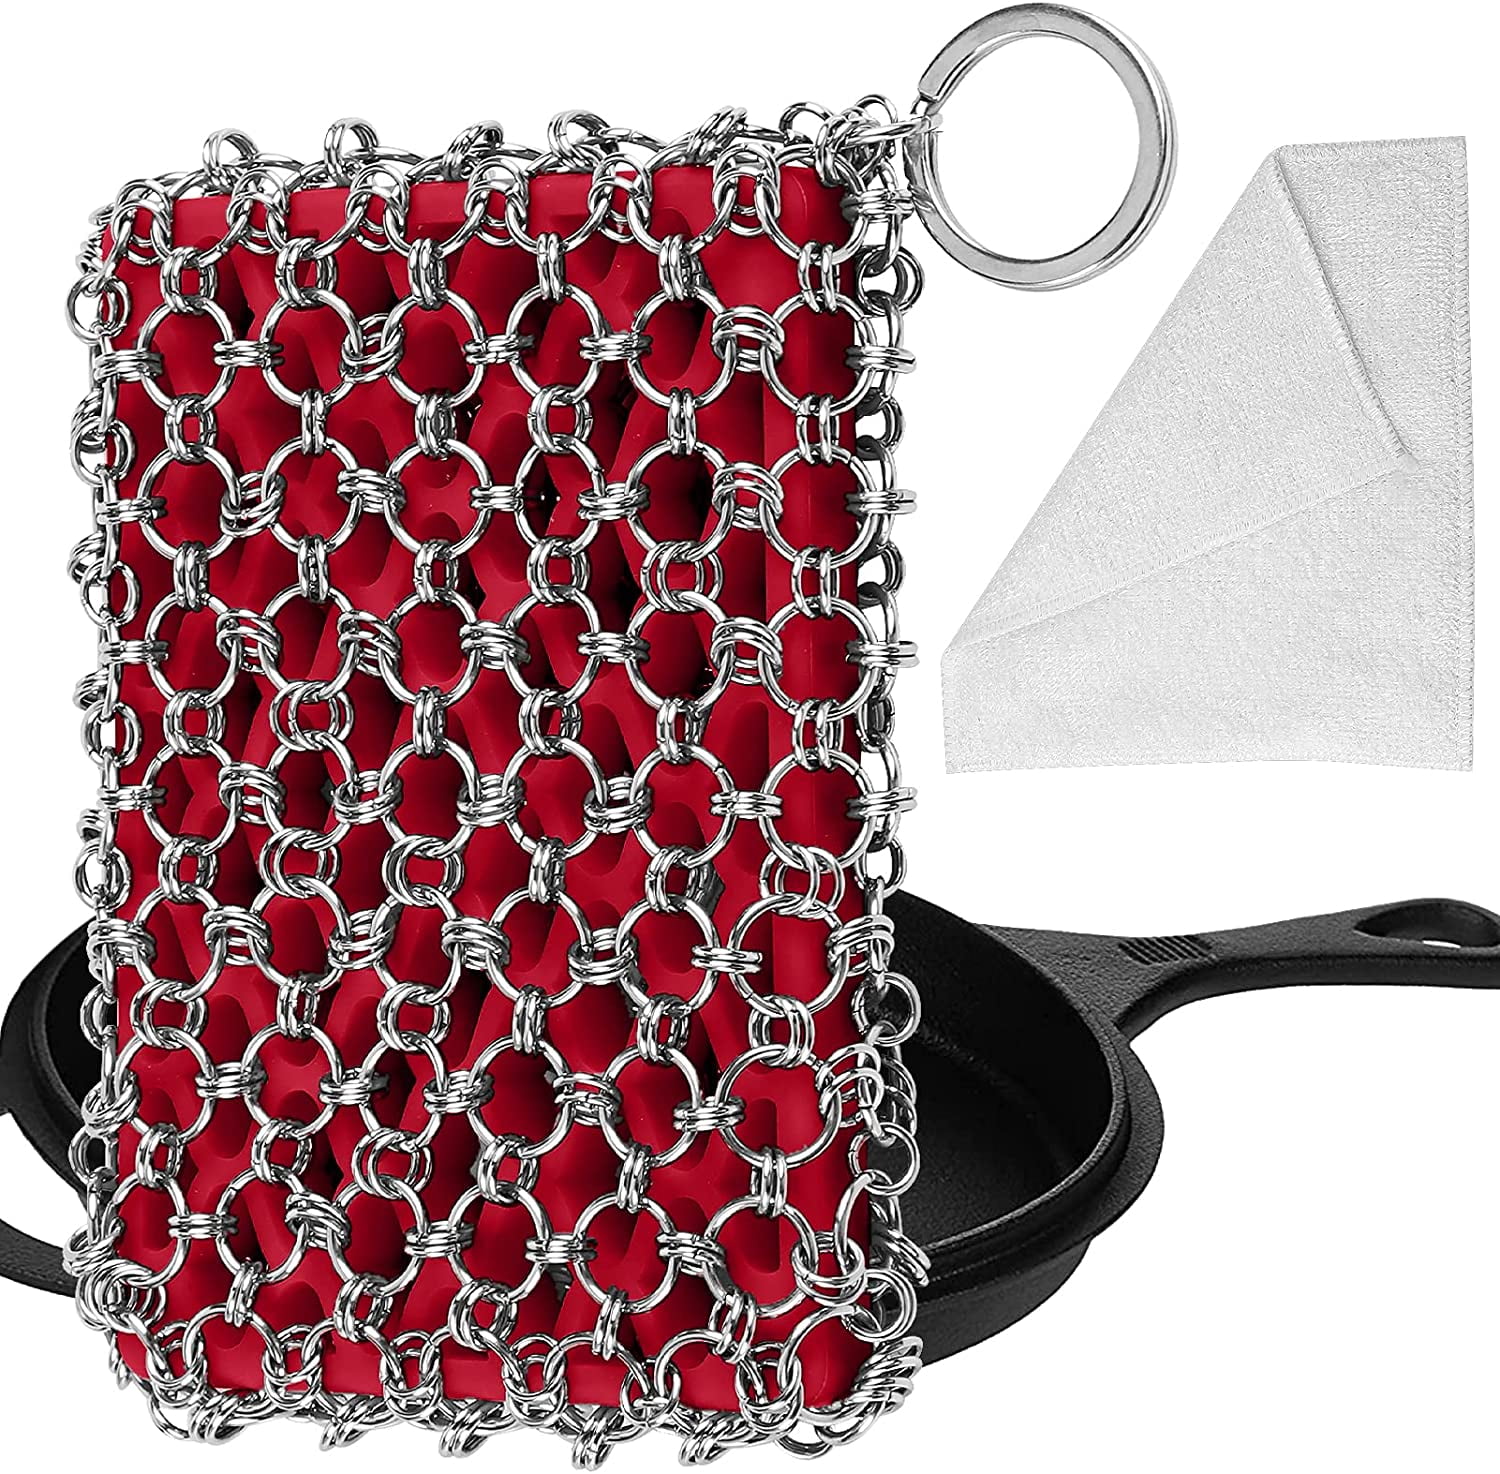 Kitcheniva Cast Iron Skillet Cleaner Chainmail Scrubber With Hanging Ring -  Round, 1 pc - Foods Co.